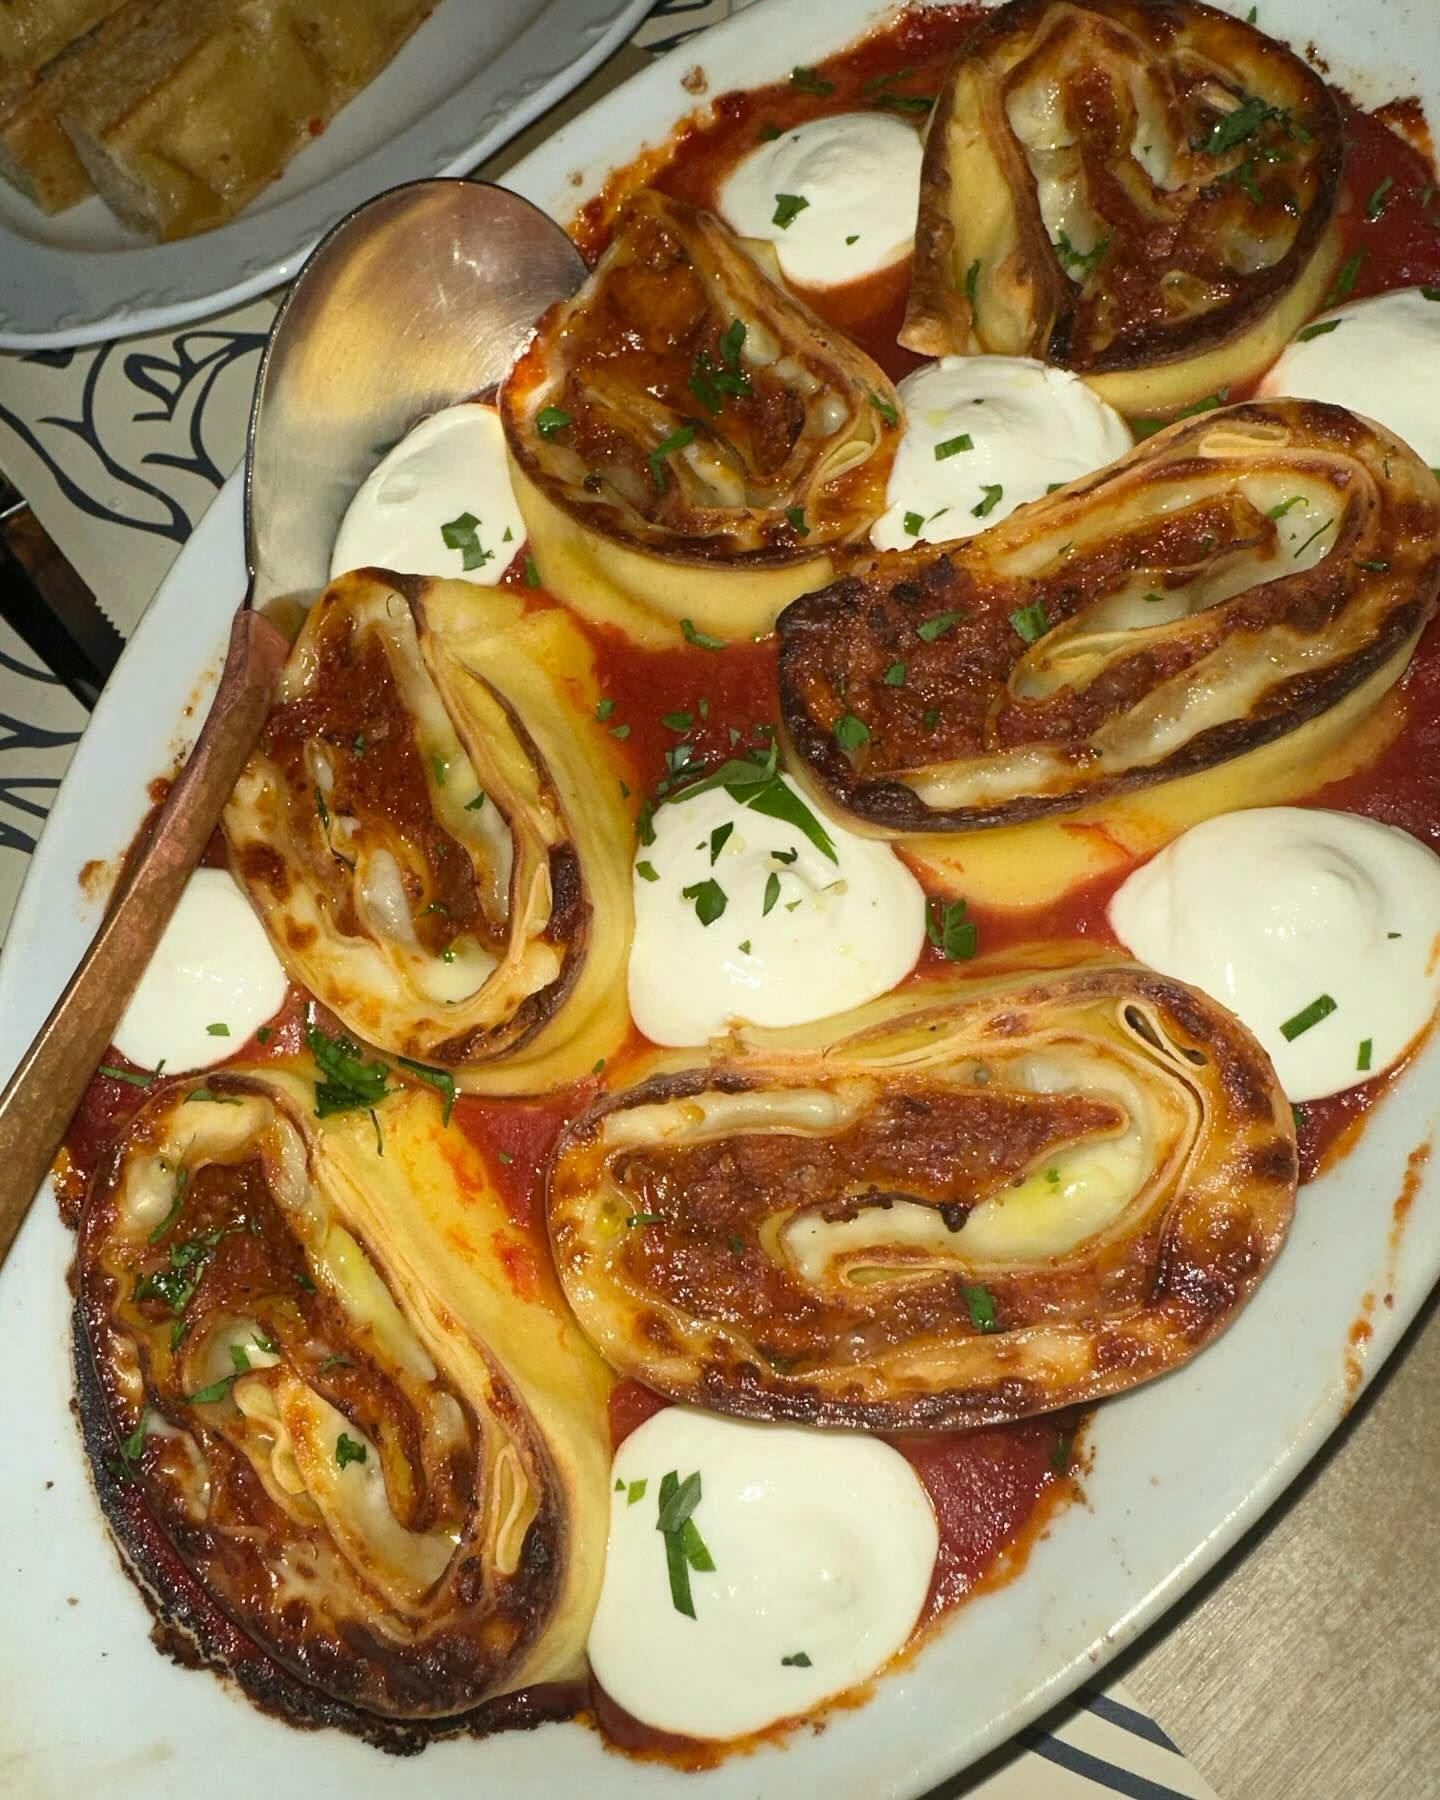 Savory rolled pasta in a tomato sauce adorned with dollops of cream and sprinkled with herbs, served on a decorative plate as part of a refined dining experience available through Booked in New York.